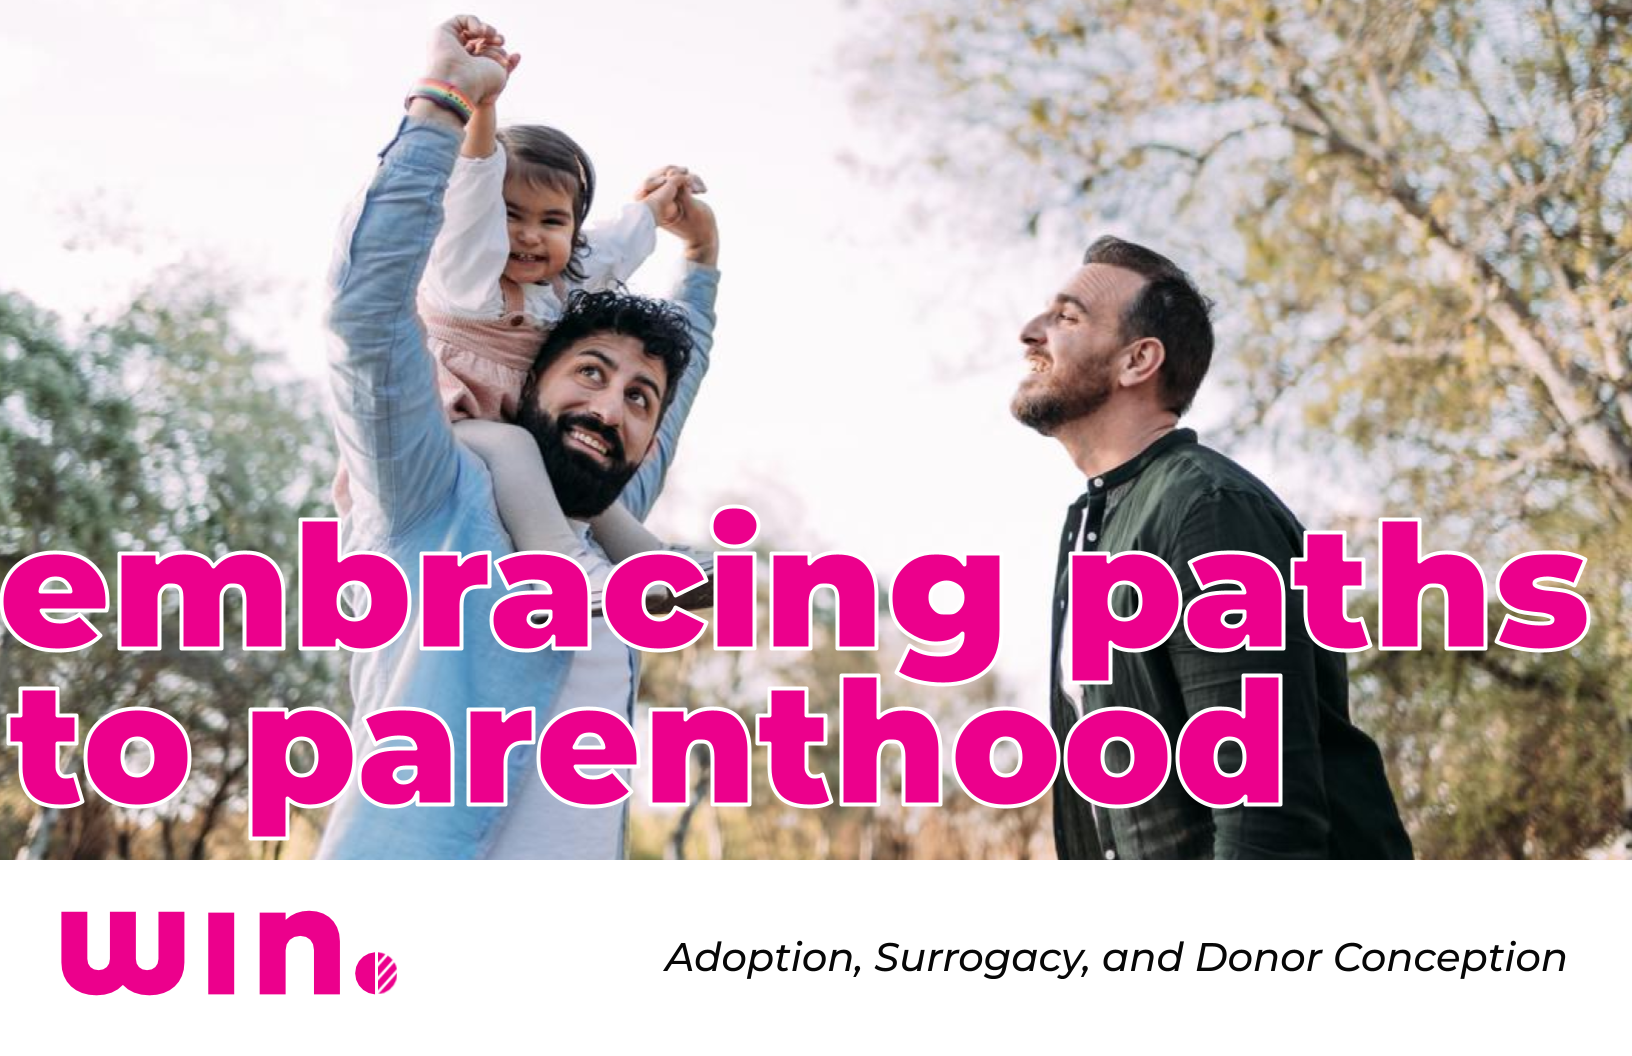 Image description NIAW_ Embracing Paths to Parenthood_ Adoption, Surrogacy, and Donor Conception